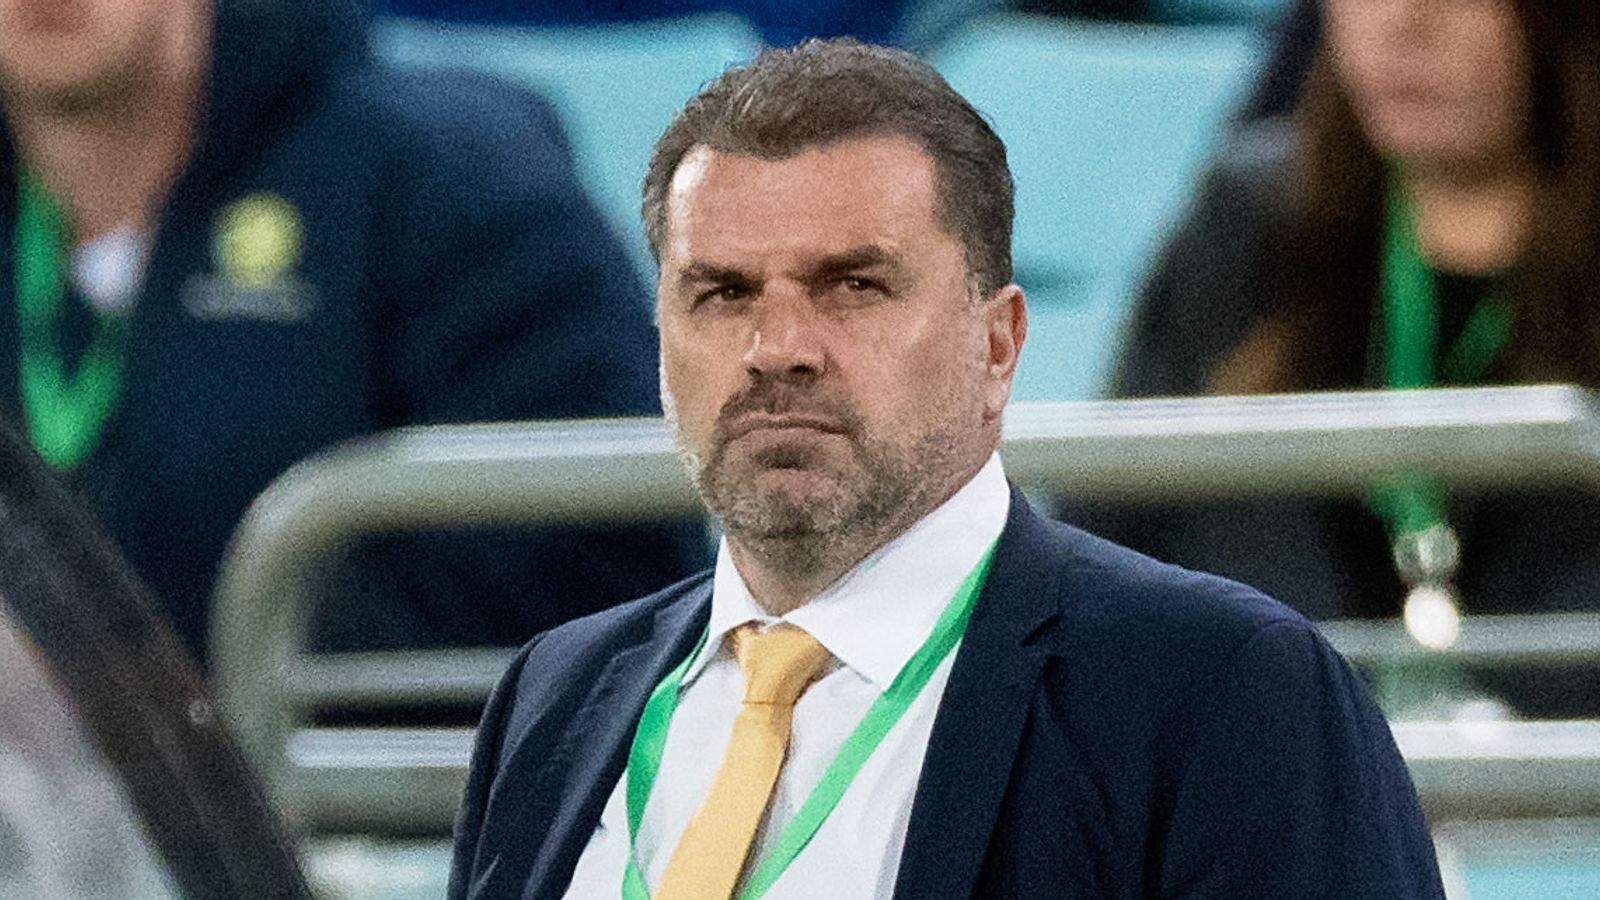 Ange Postecoglou: Celtic verbally agrees personal terms with Yokohama F. Marinos boss to become new manager